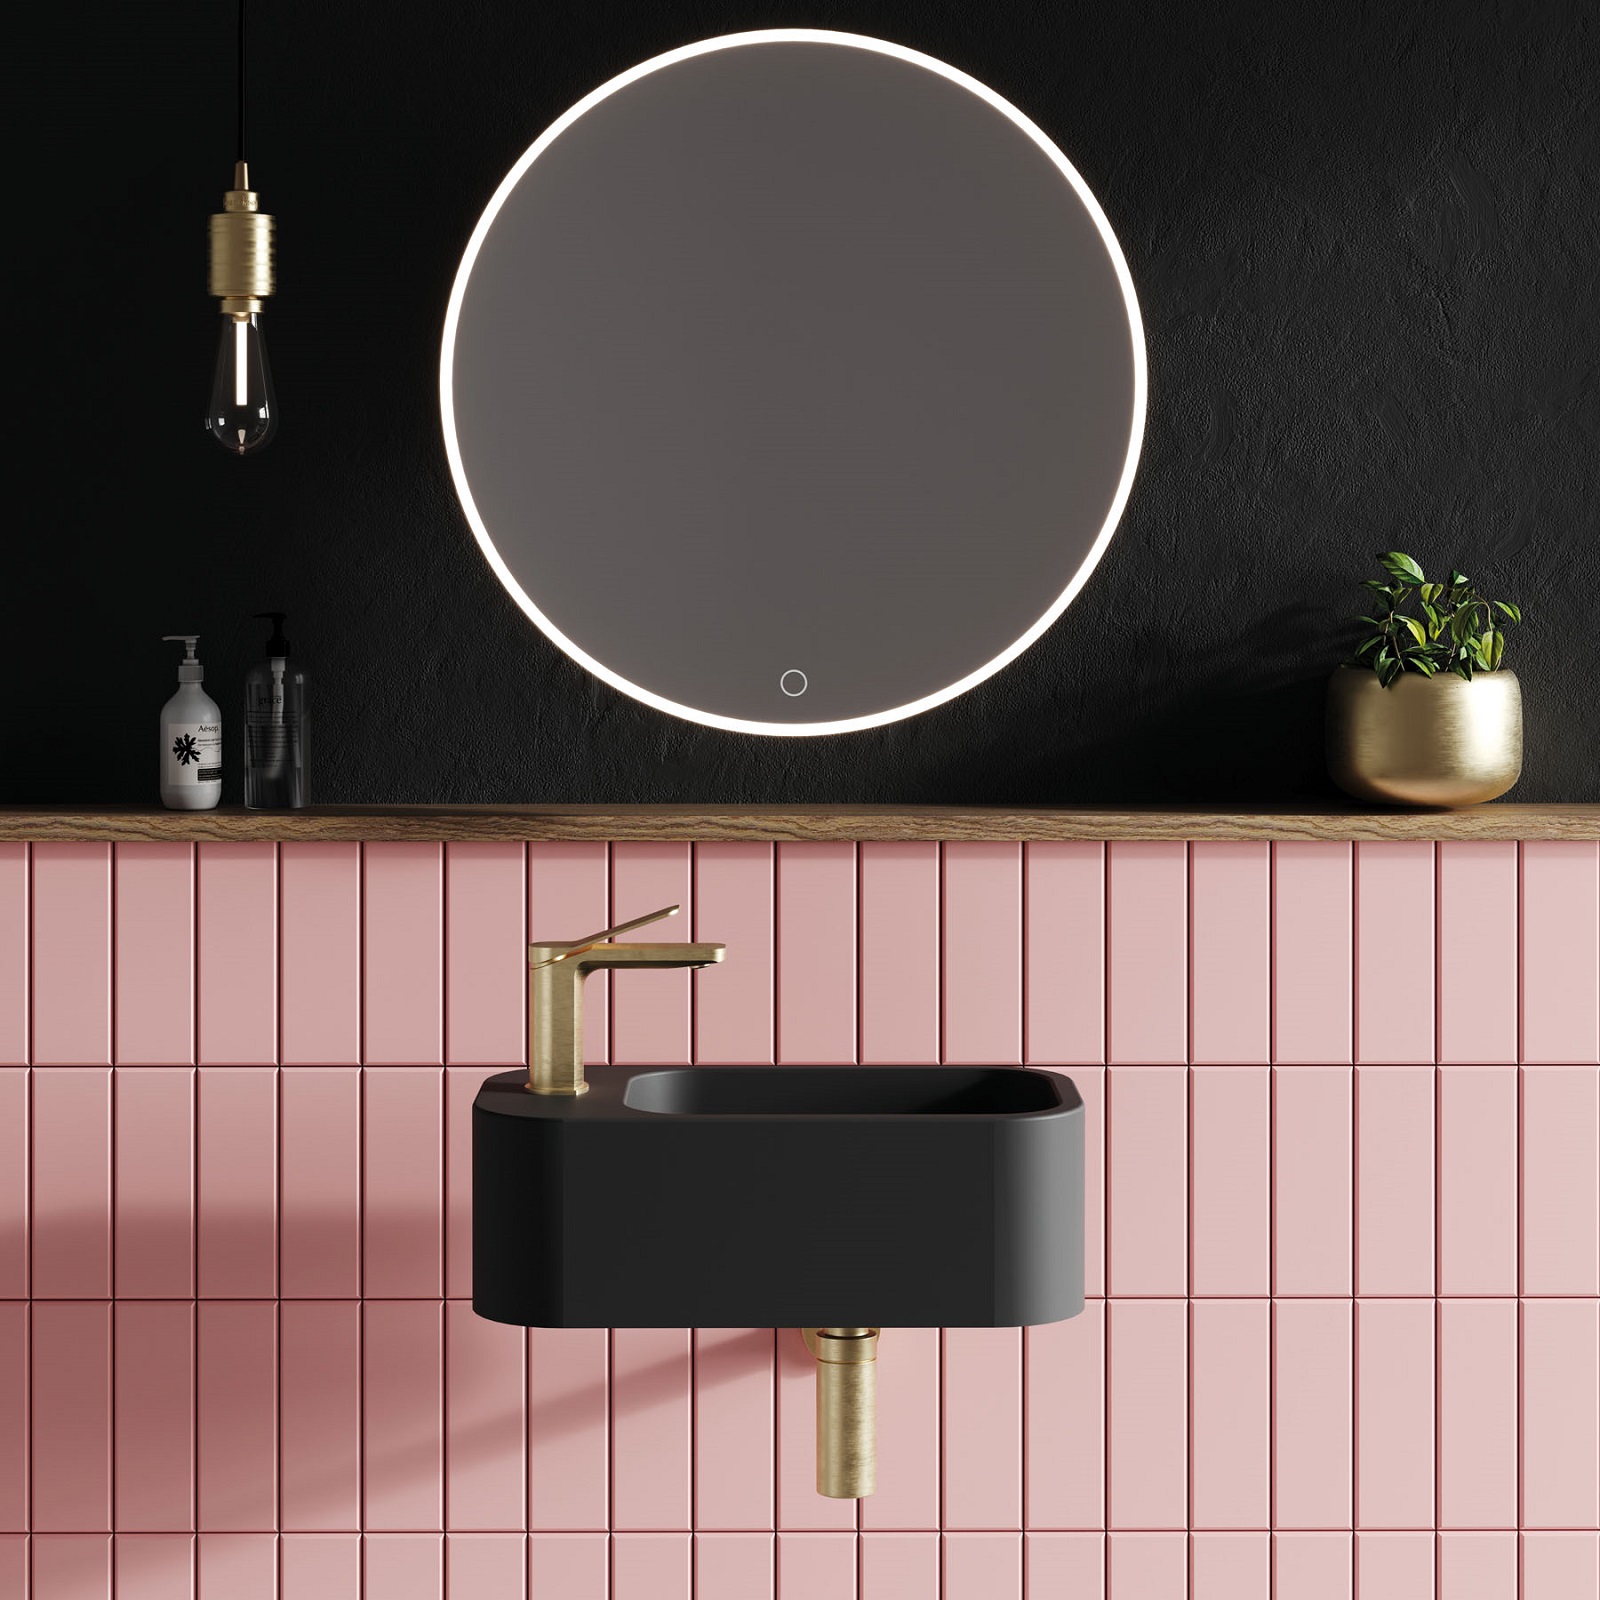 Lifestyle image of a bathroom with painted black walls and a matt black wall hung basin contrast against pink tiles